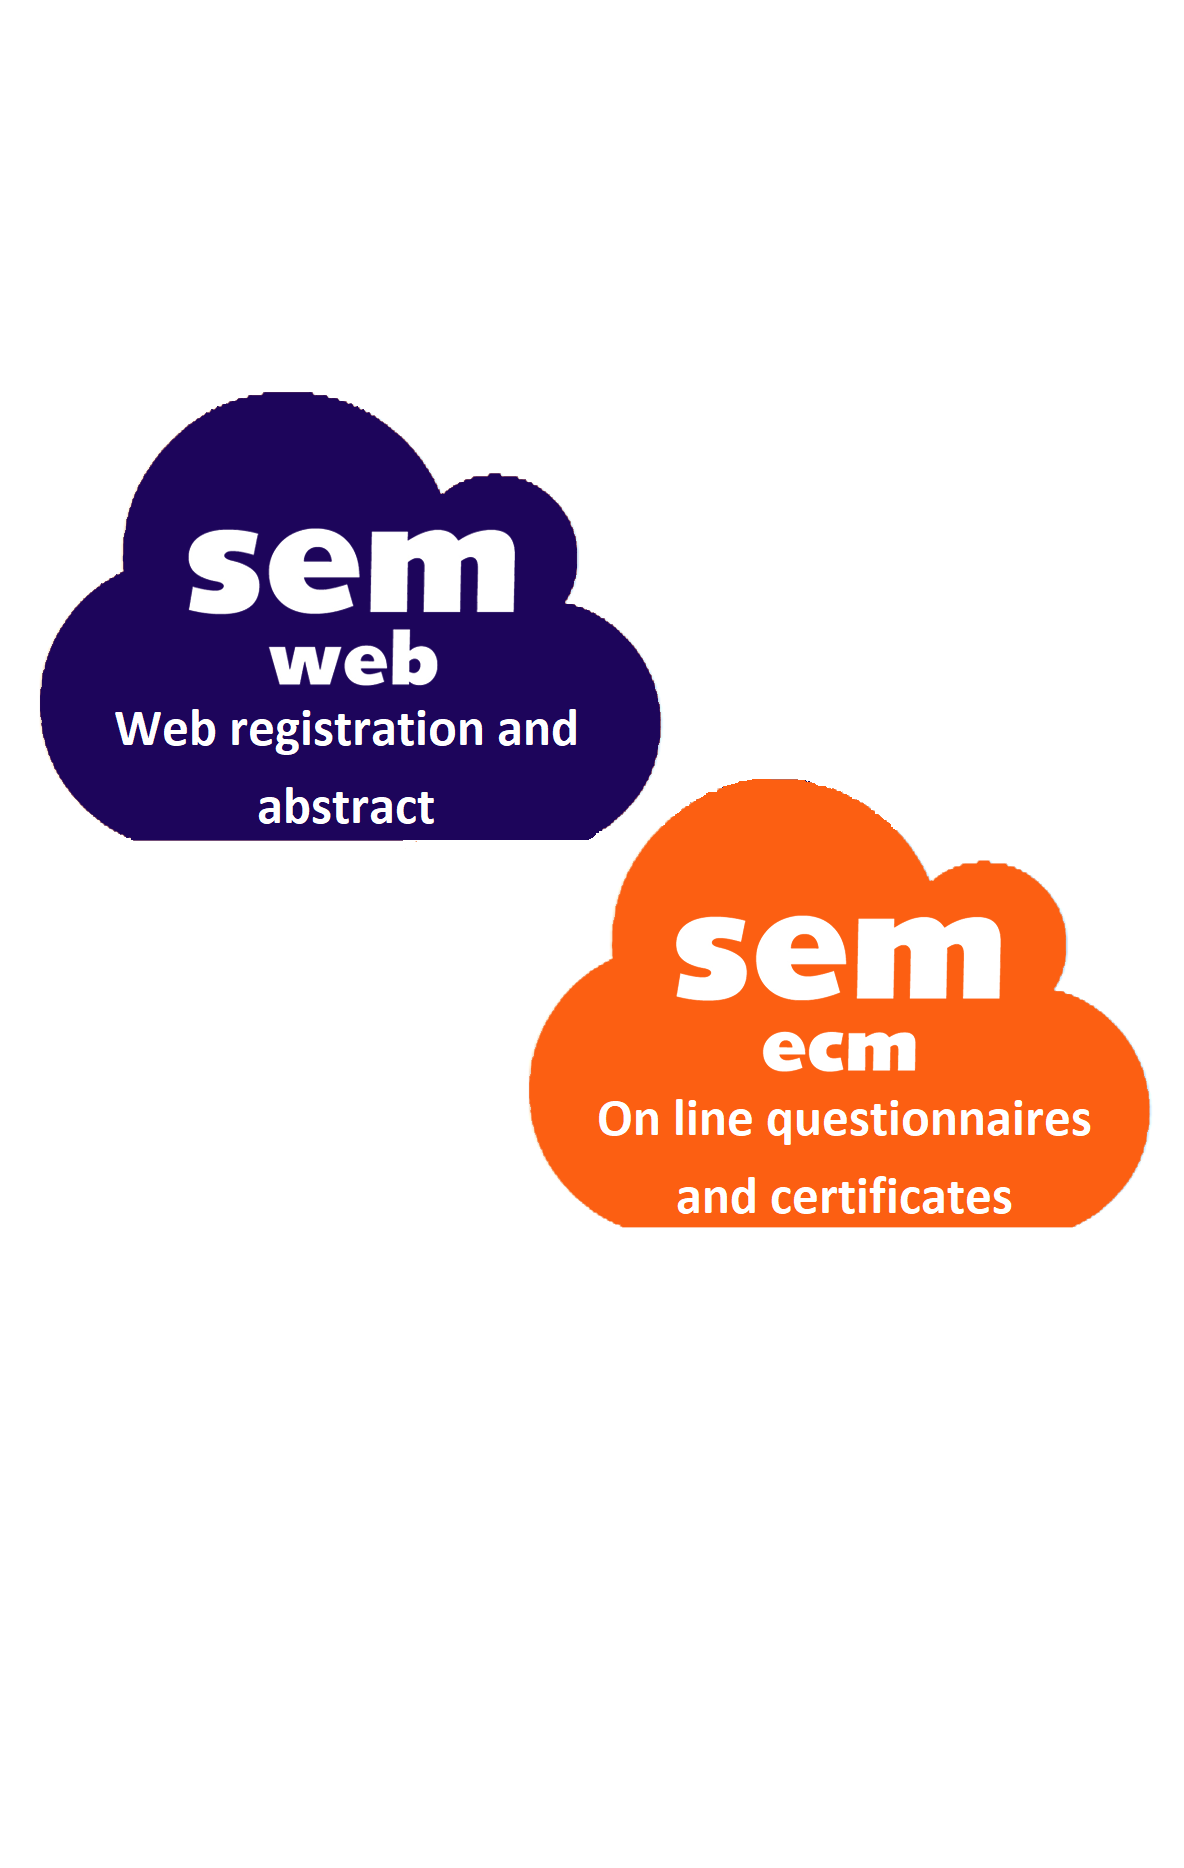 web registration and abstract, online questionnaires and certificates